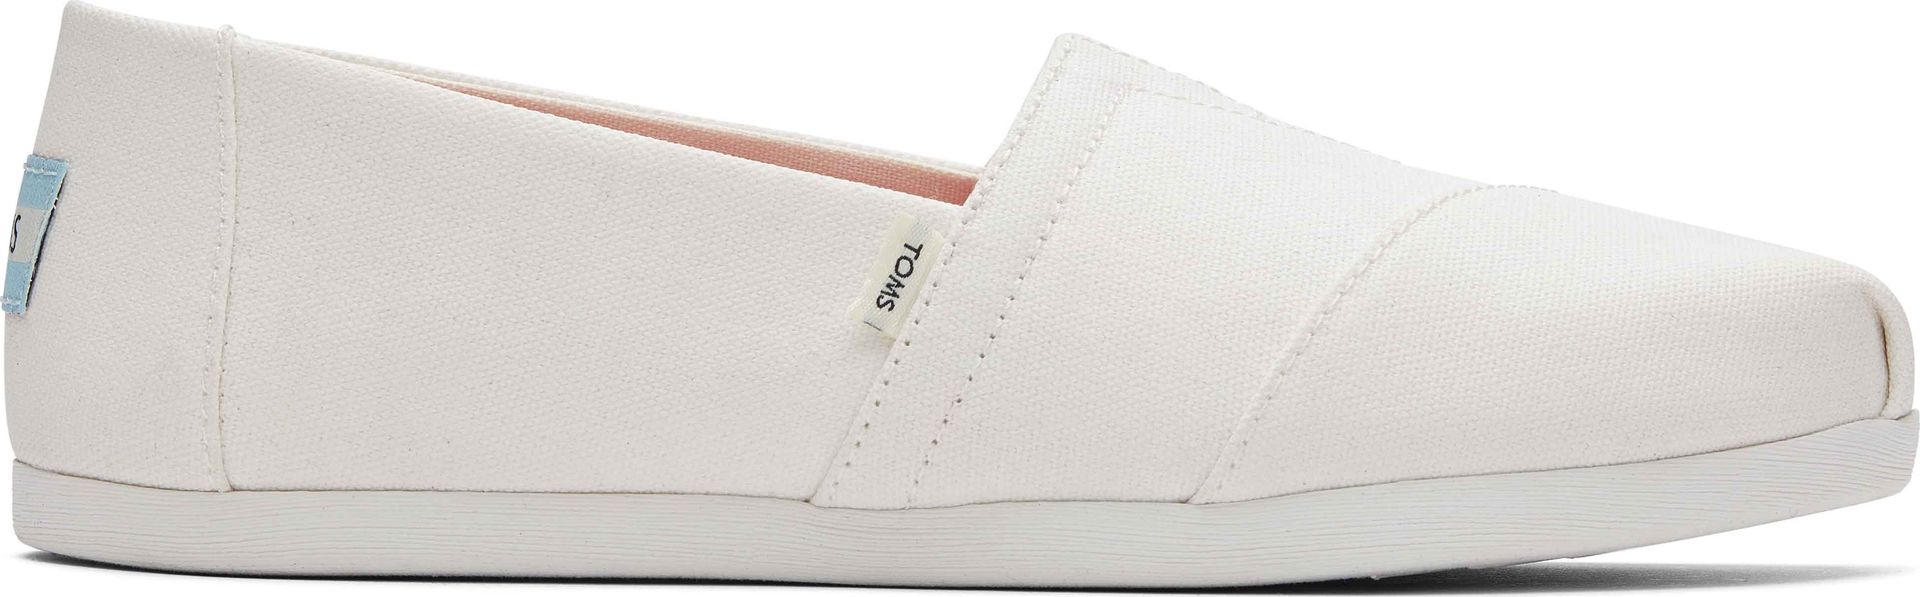 TOMS Color Changing Twill Women's Alpargata Dusty Pink 38,5